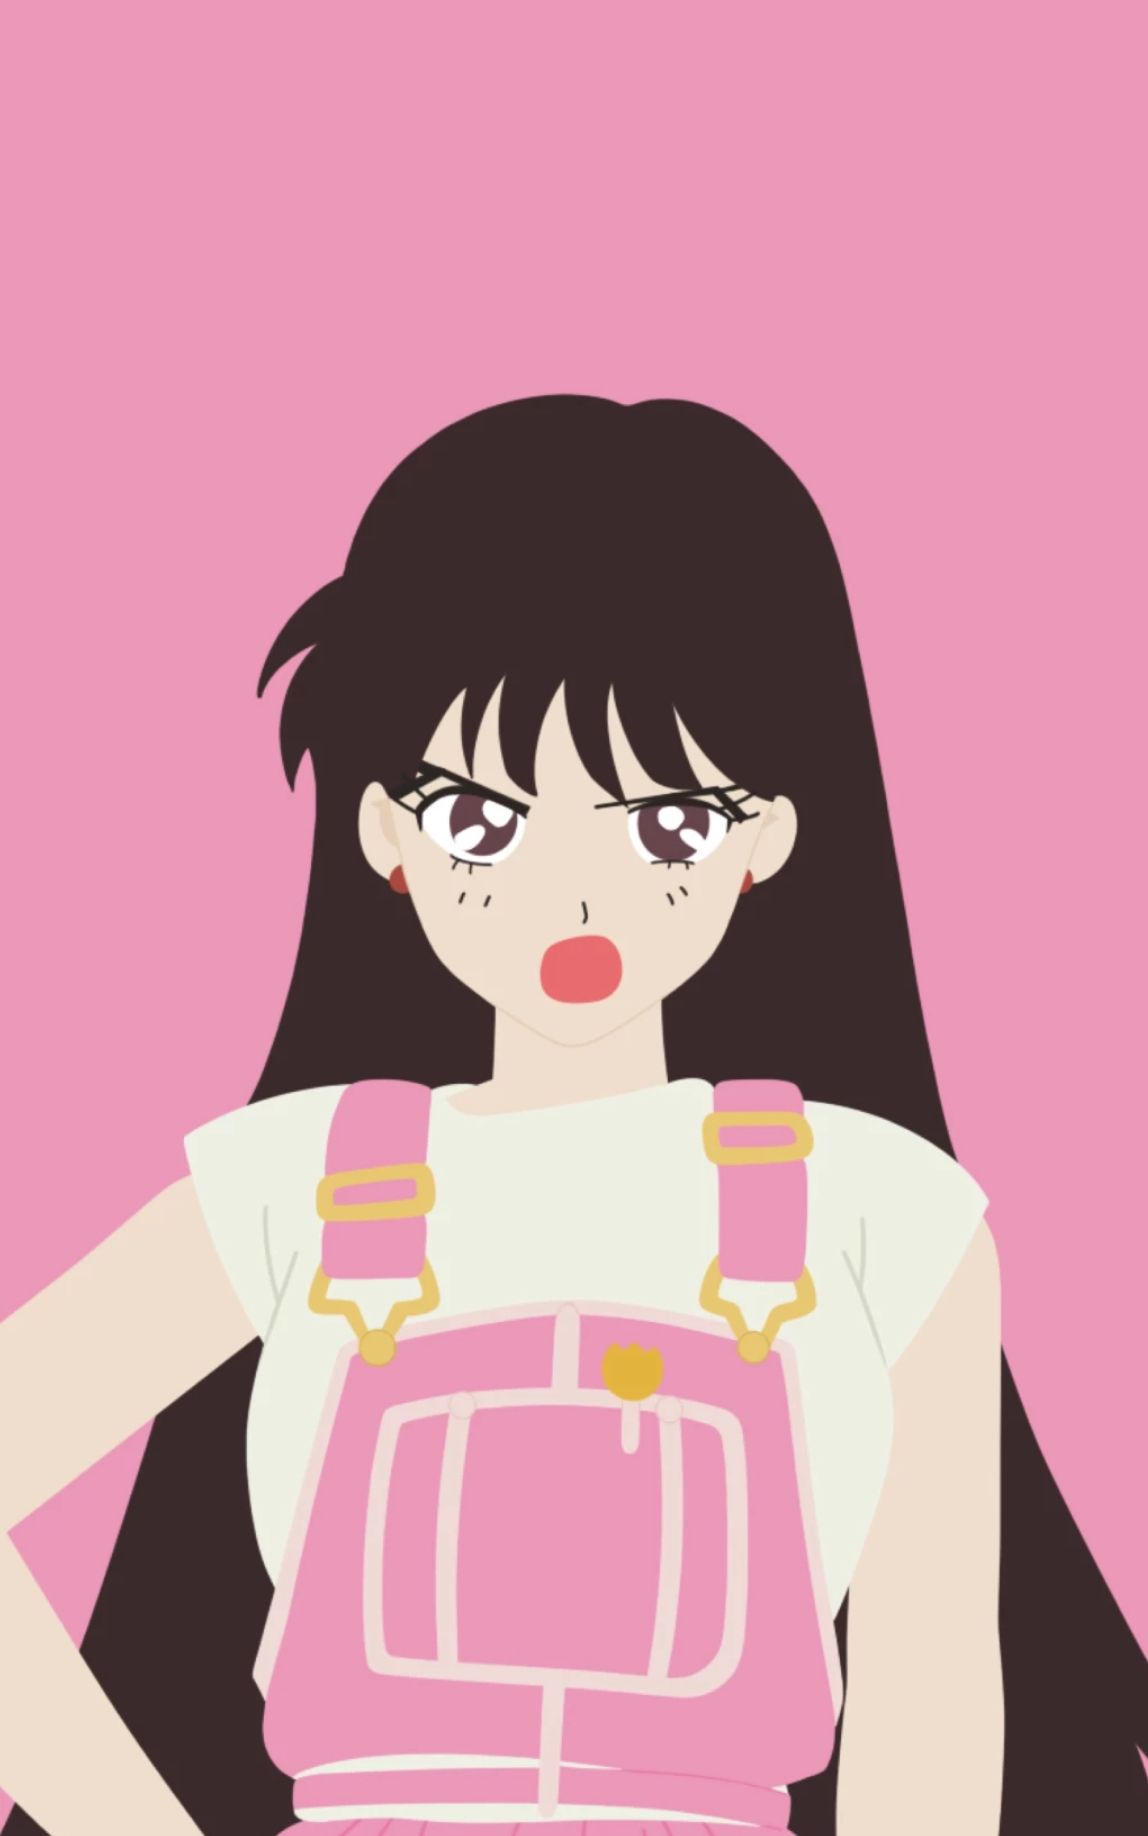 sailor mars, background and pink